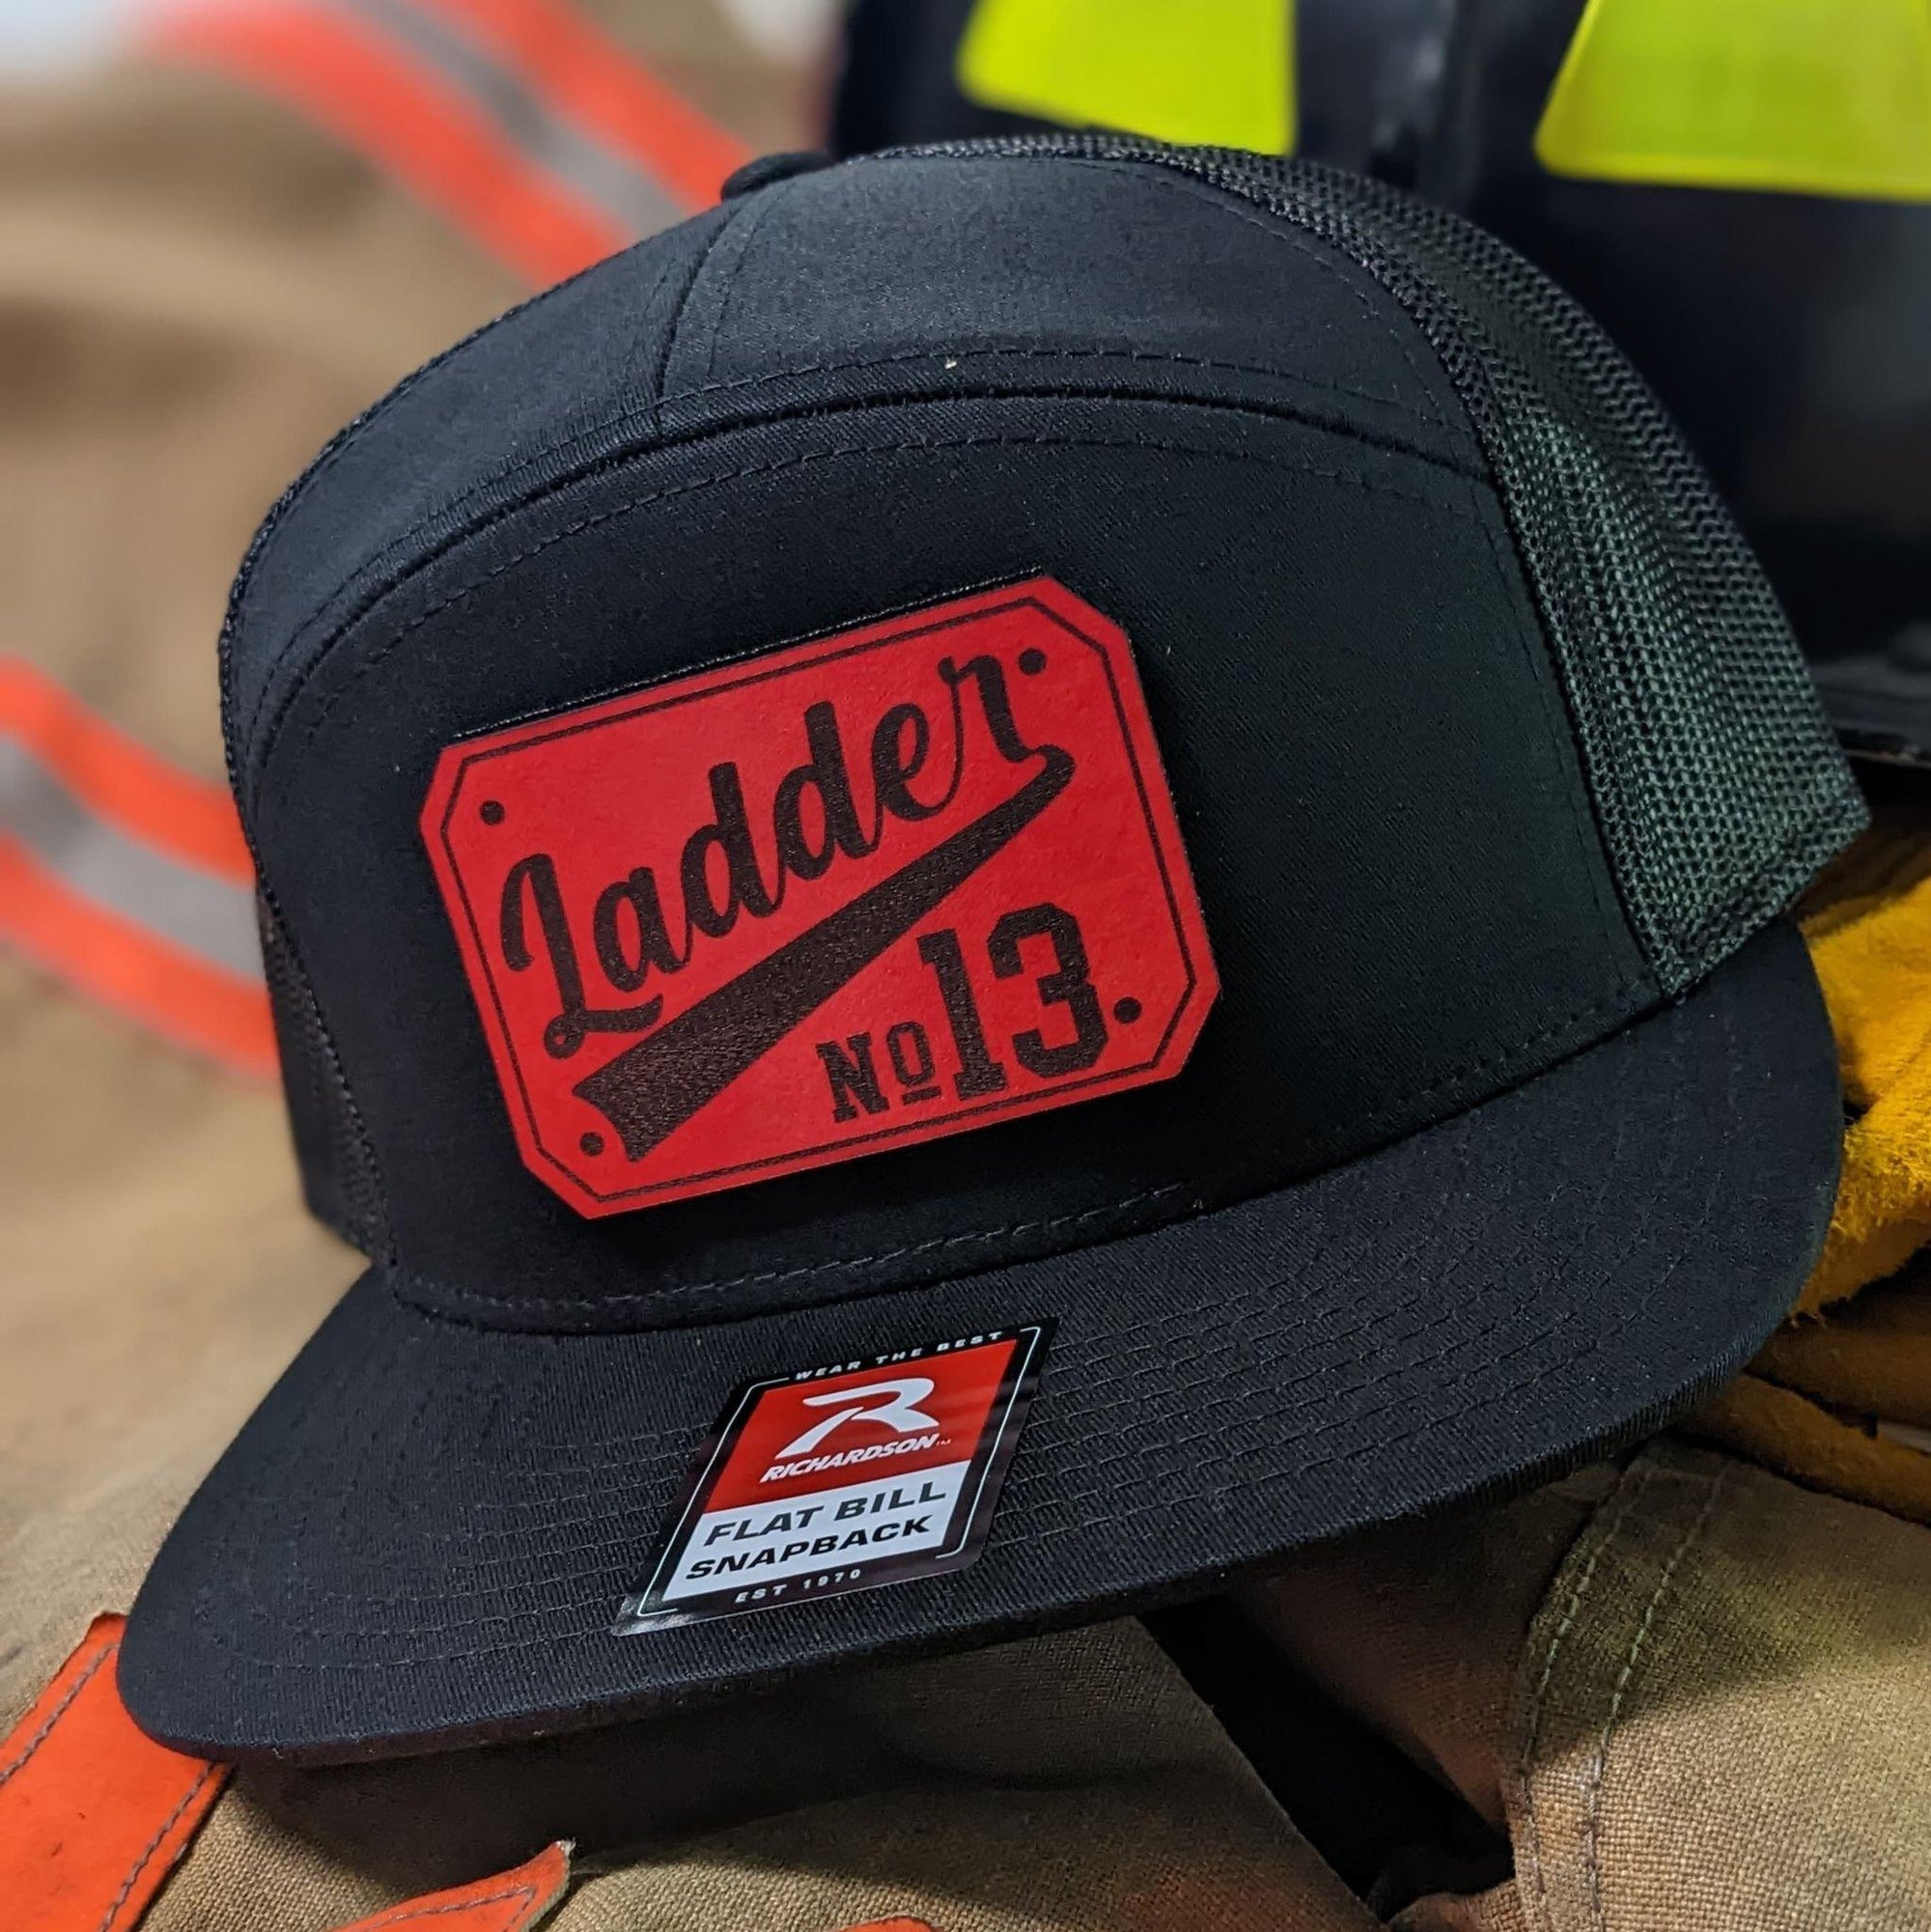 Custom Richardson hats, custom firefighter hat, first responder hats, custom leather patch hats, Custom firefighter hats, fireman gifts, Fire shield hat, Thin red line hats, Custom fire department hats, leather head, fire fighter hat, fireman hats